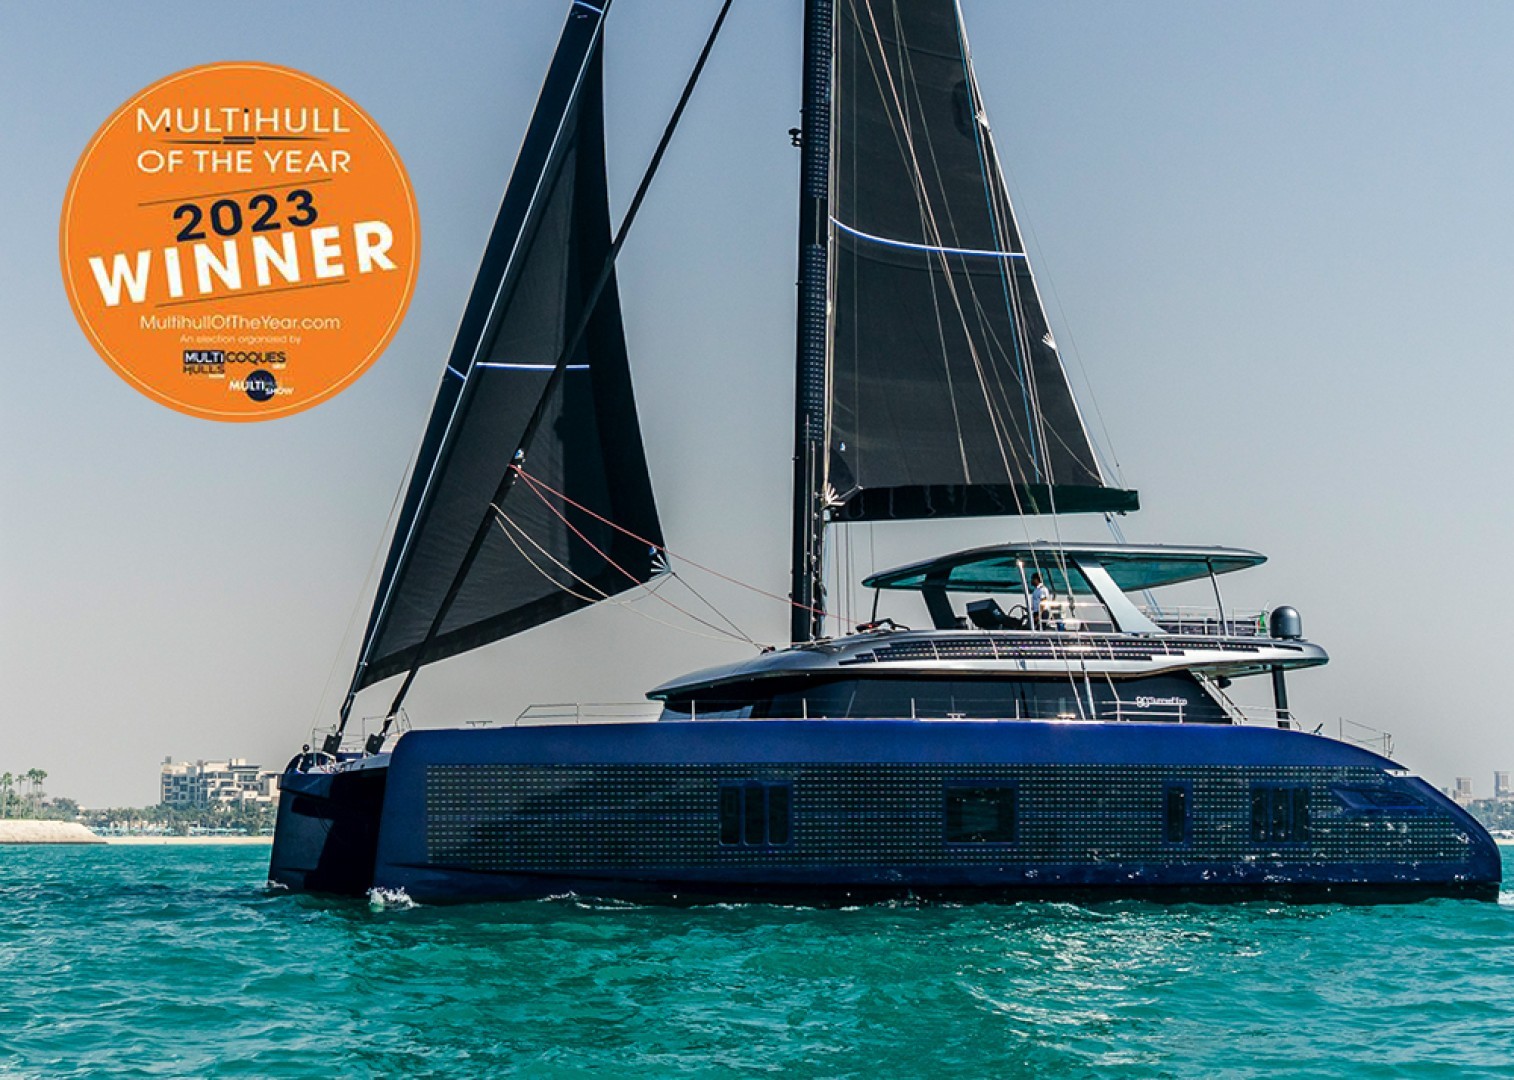 The Sunreef 80 Eco recognized as Multihull of the Year 2023